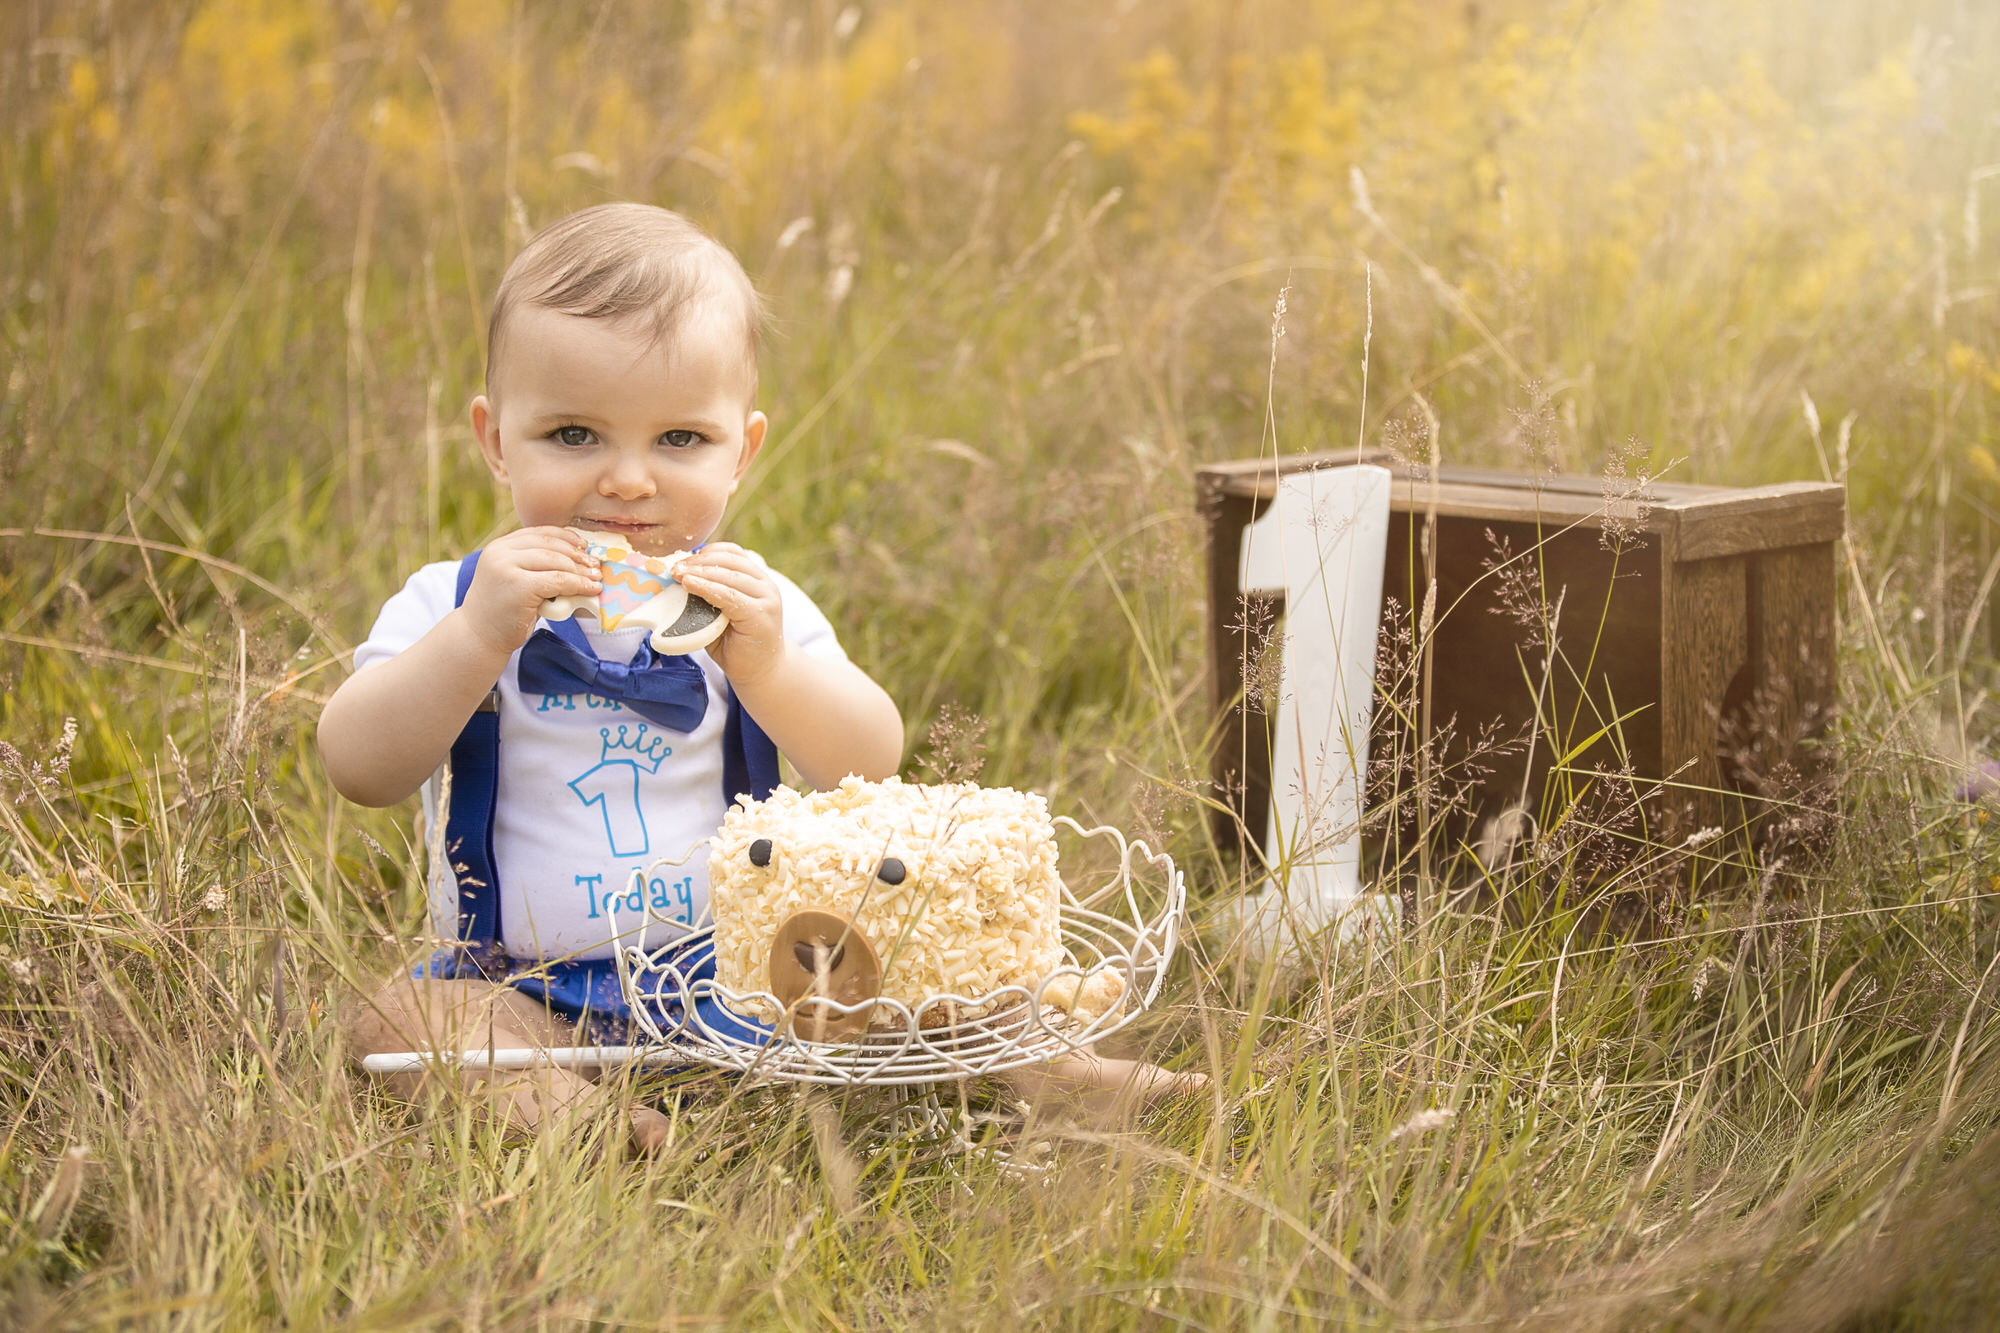 Cake Smash, Family and Baby Photography taken in the Photography studio in Whitchurch Hampshire